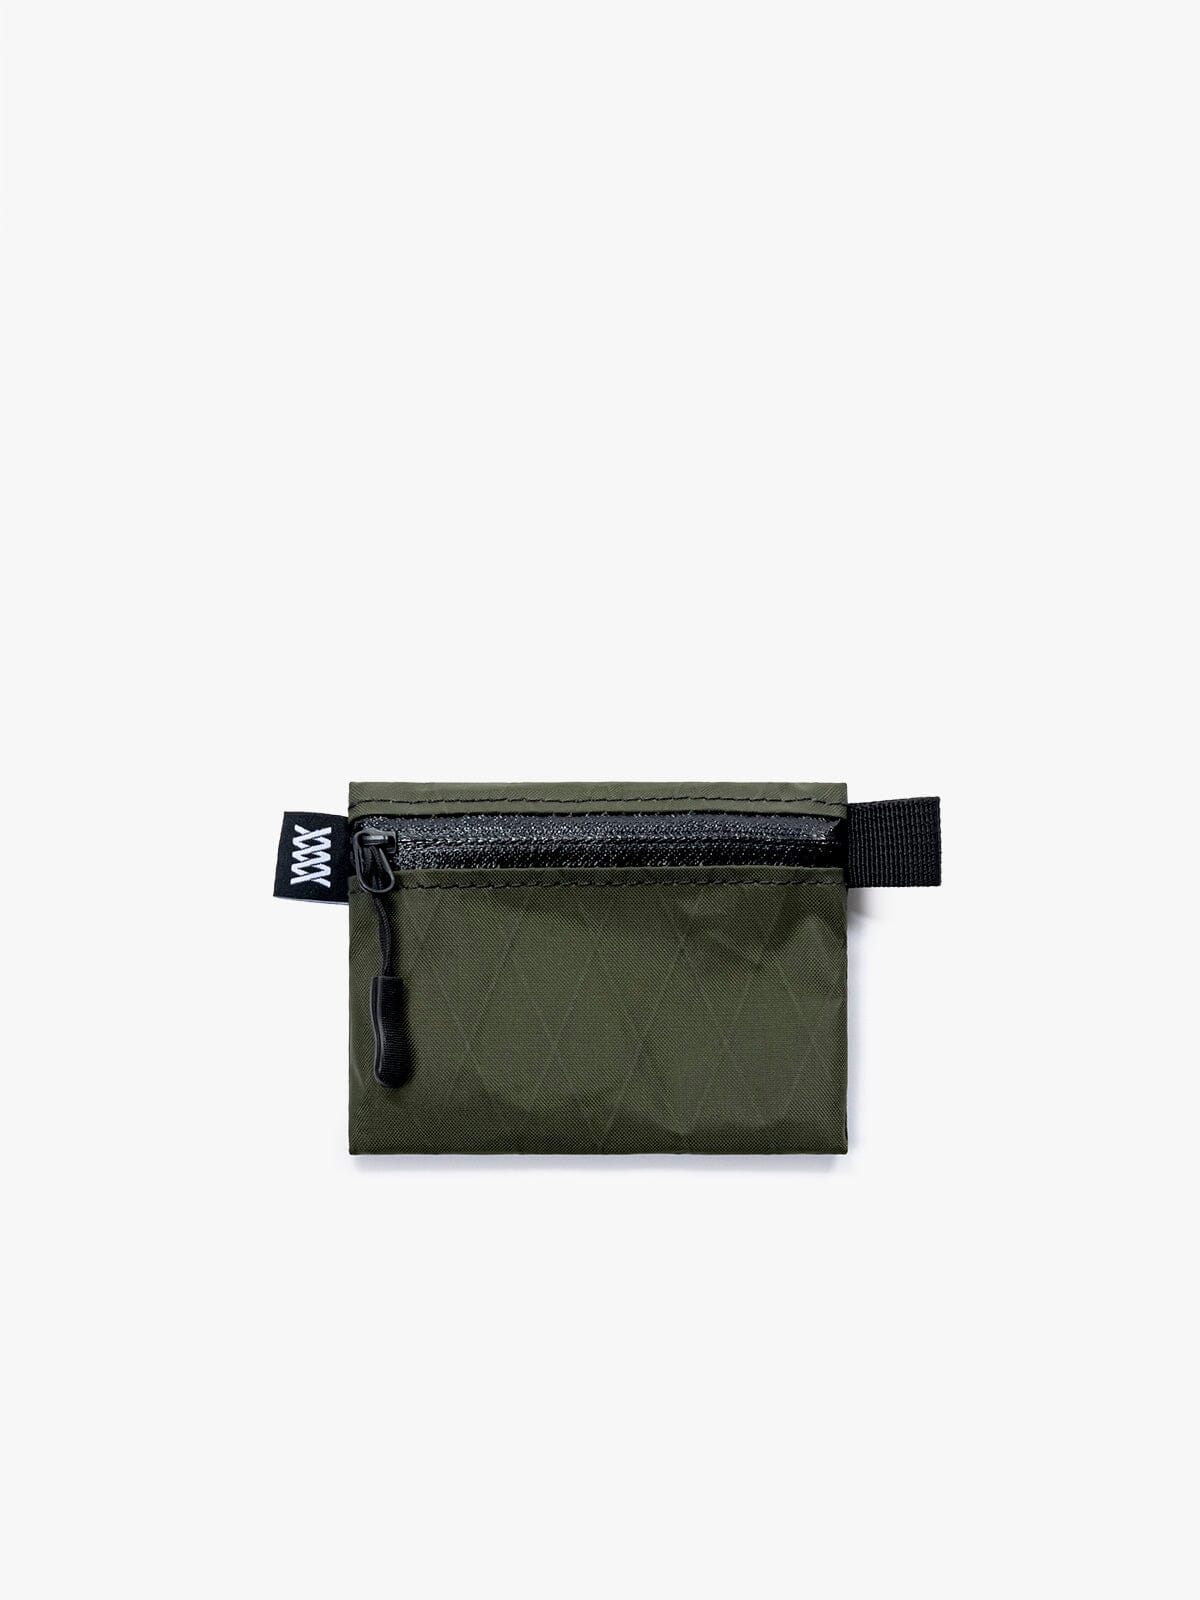 VX Wallet & Utility Pouch by Mission Workshop - Weatherproof Bags & Technical Apparel - San Francisco & Los Angeles - Built to endure - Guaranteed forever